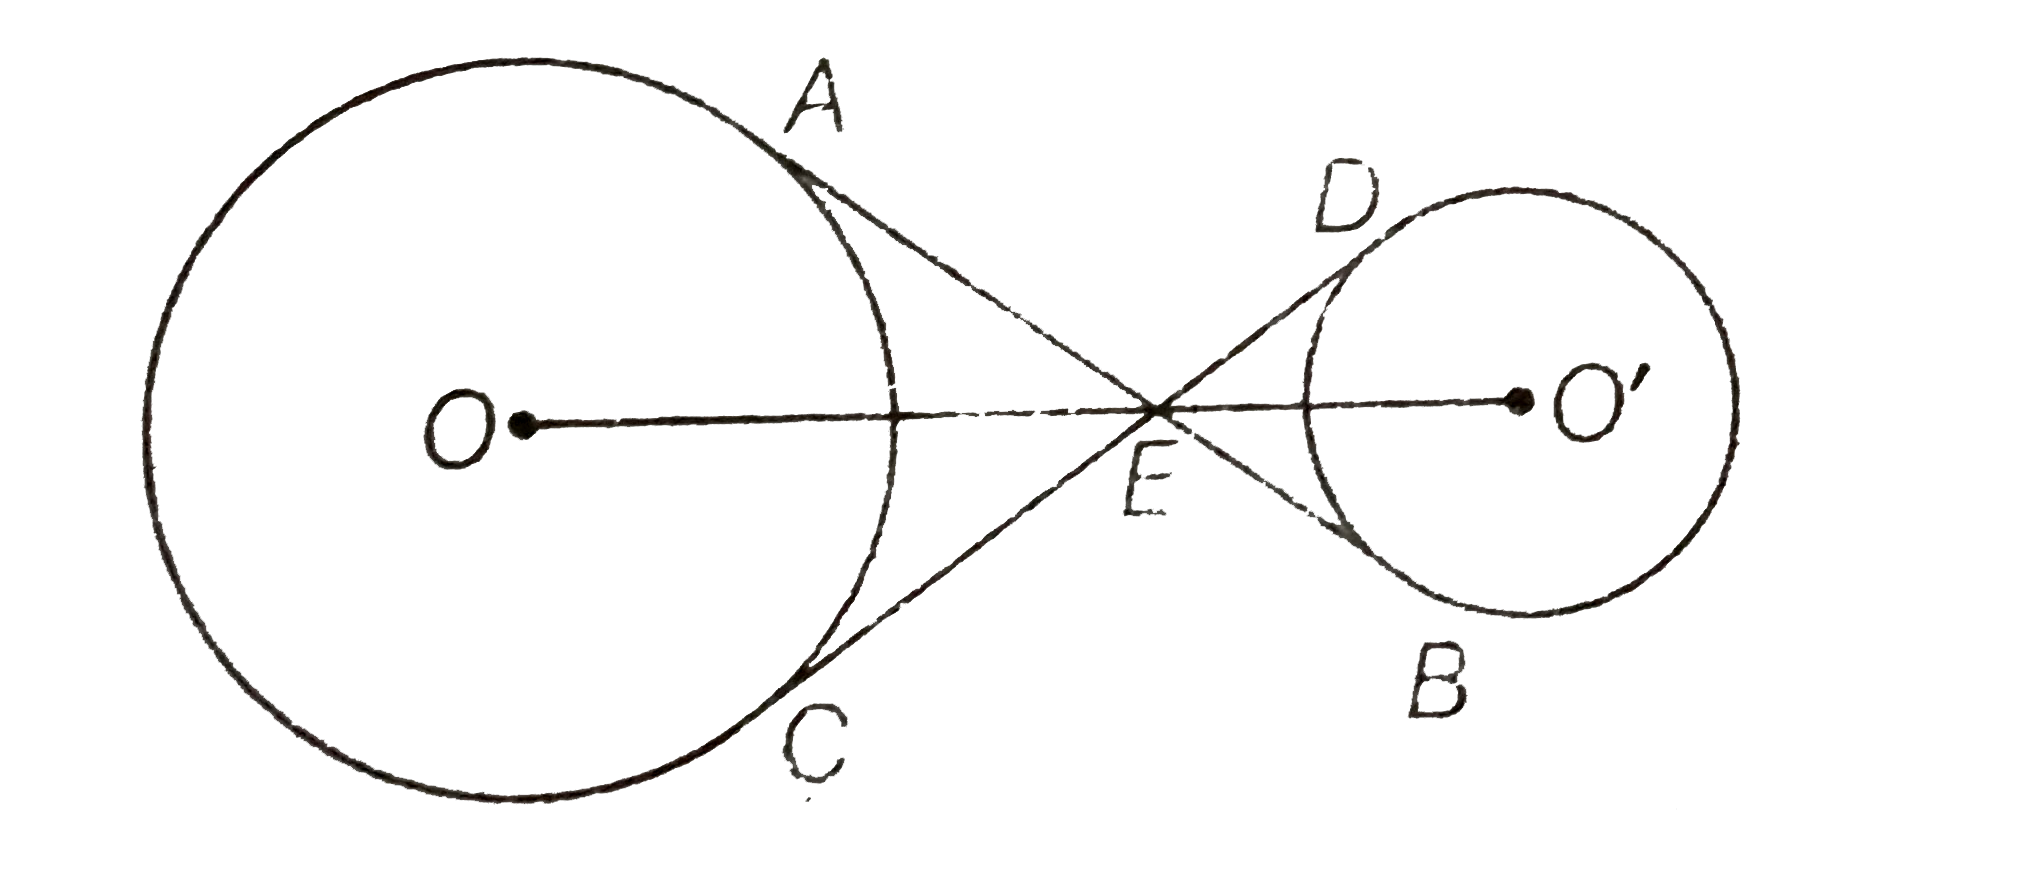 In a figure the common tangents, AB and CD to two circles with centers O and O' intersect at E. Prove that the points O, E and O' are collinear.